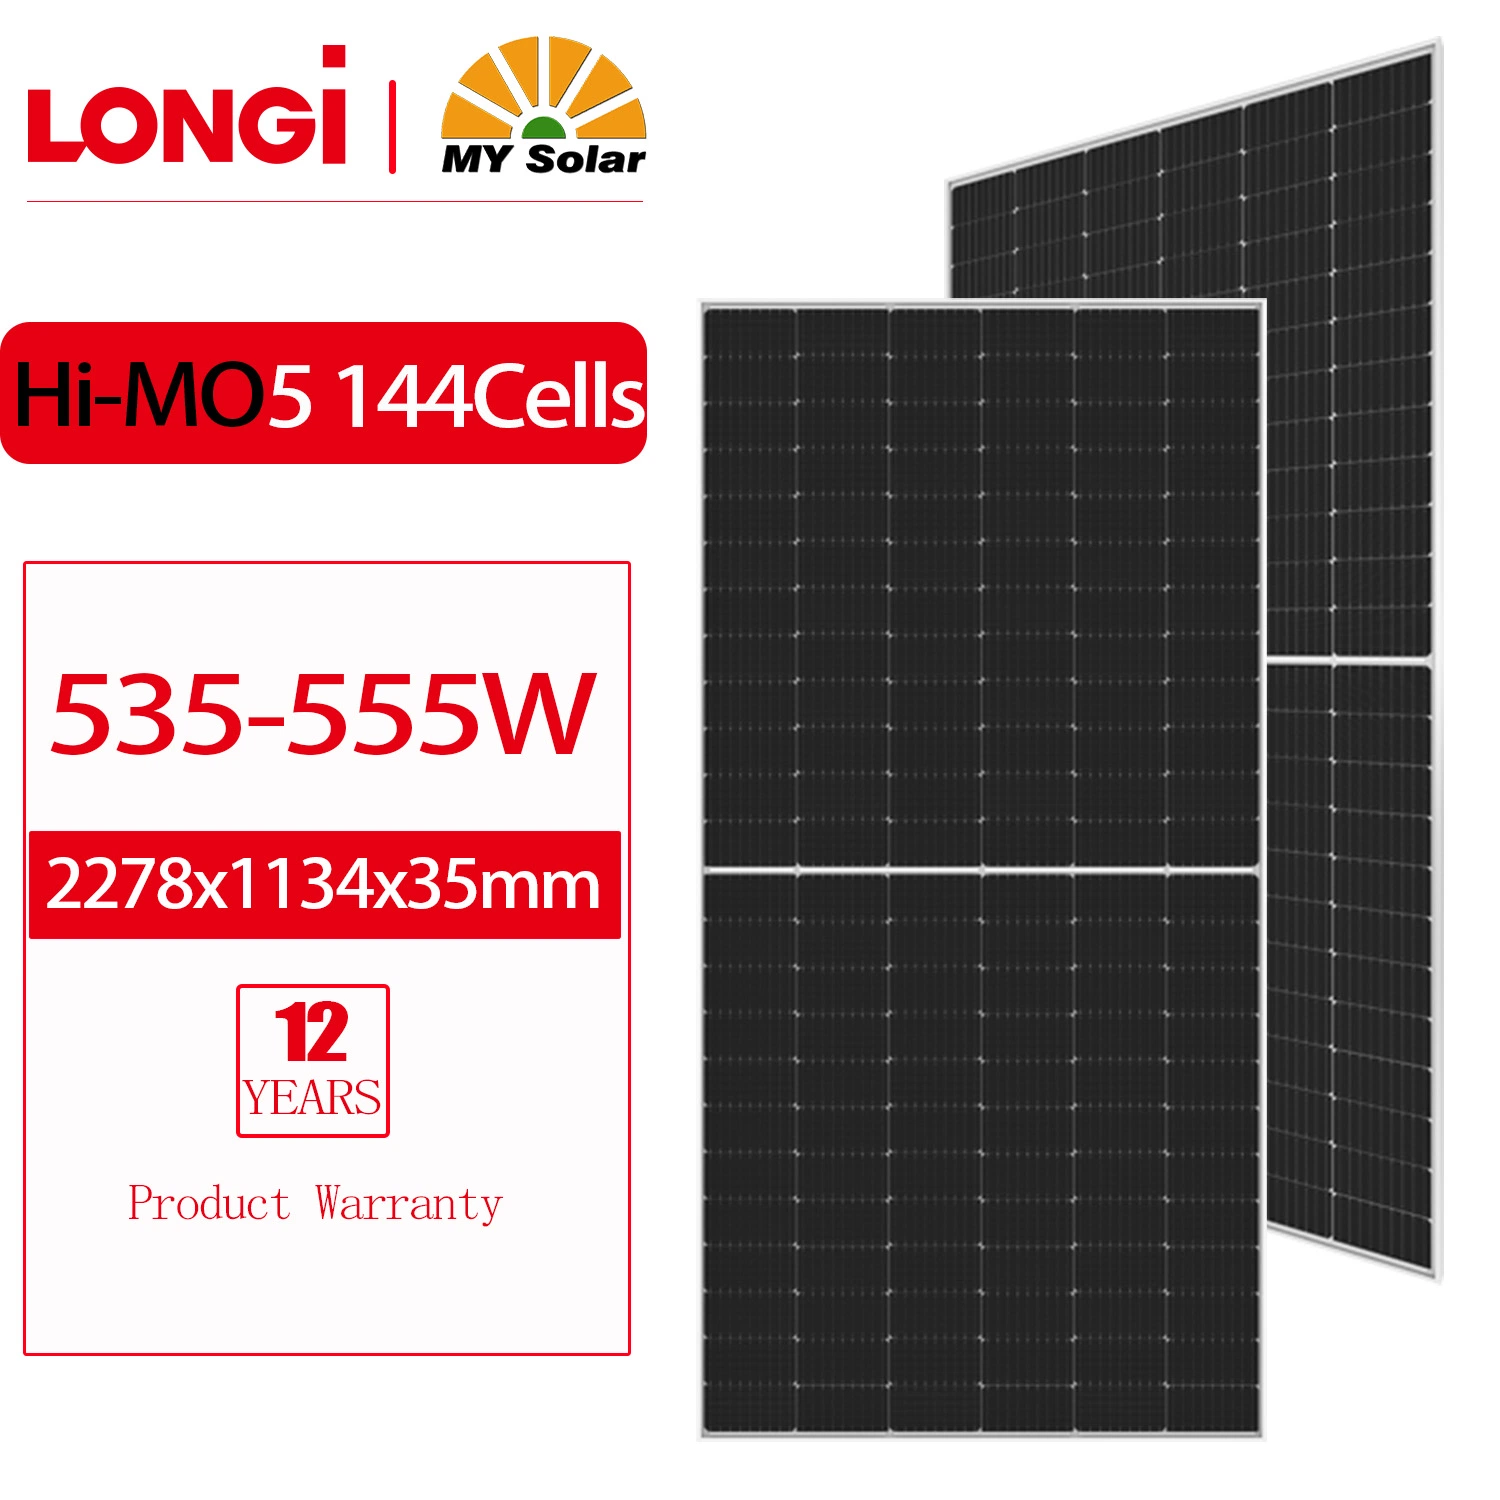 Longi/Mysolar Hot Selling Factory Direct Price 535W 540W 545W 550W 555W Half Cell Green Energy Solar Panel for Home Power System